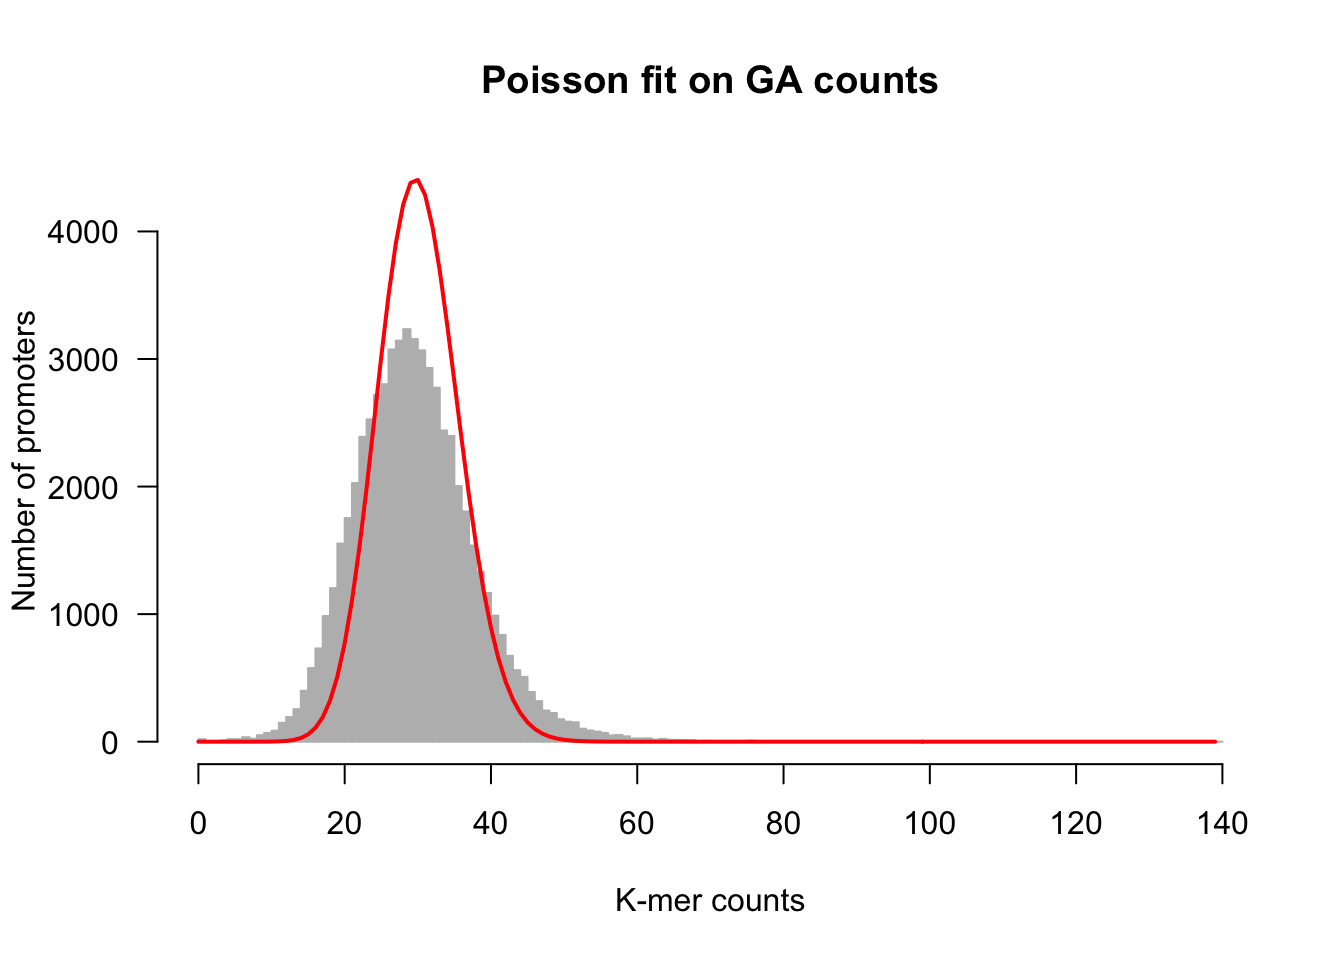 Fitting of a Poisson distribution on dinucleotide counts